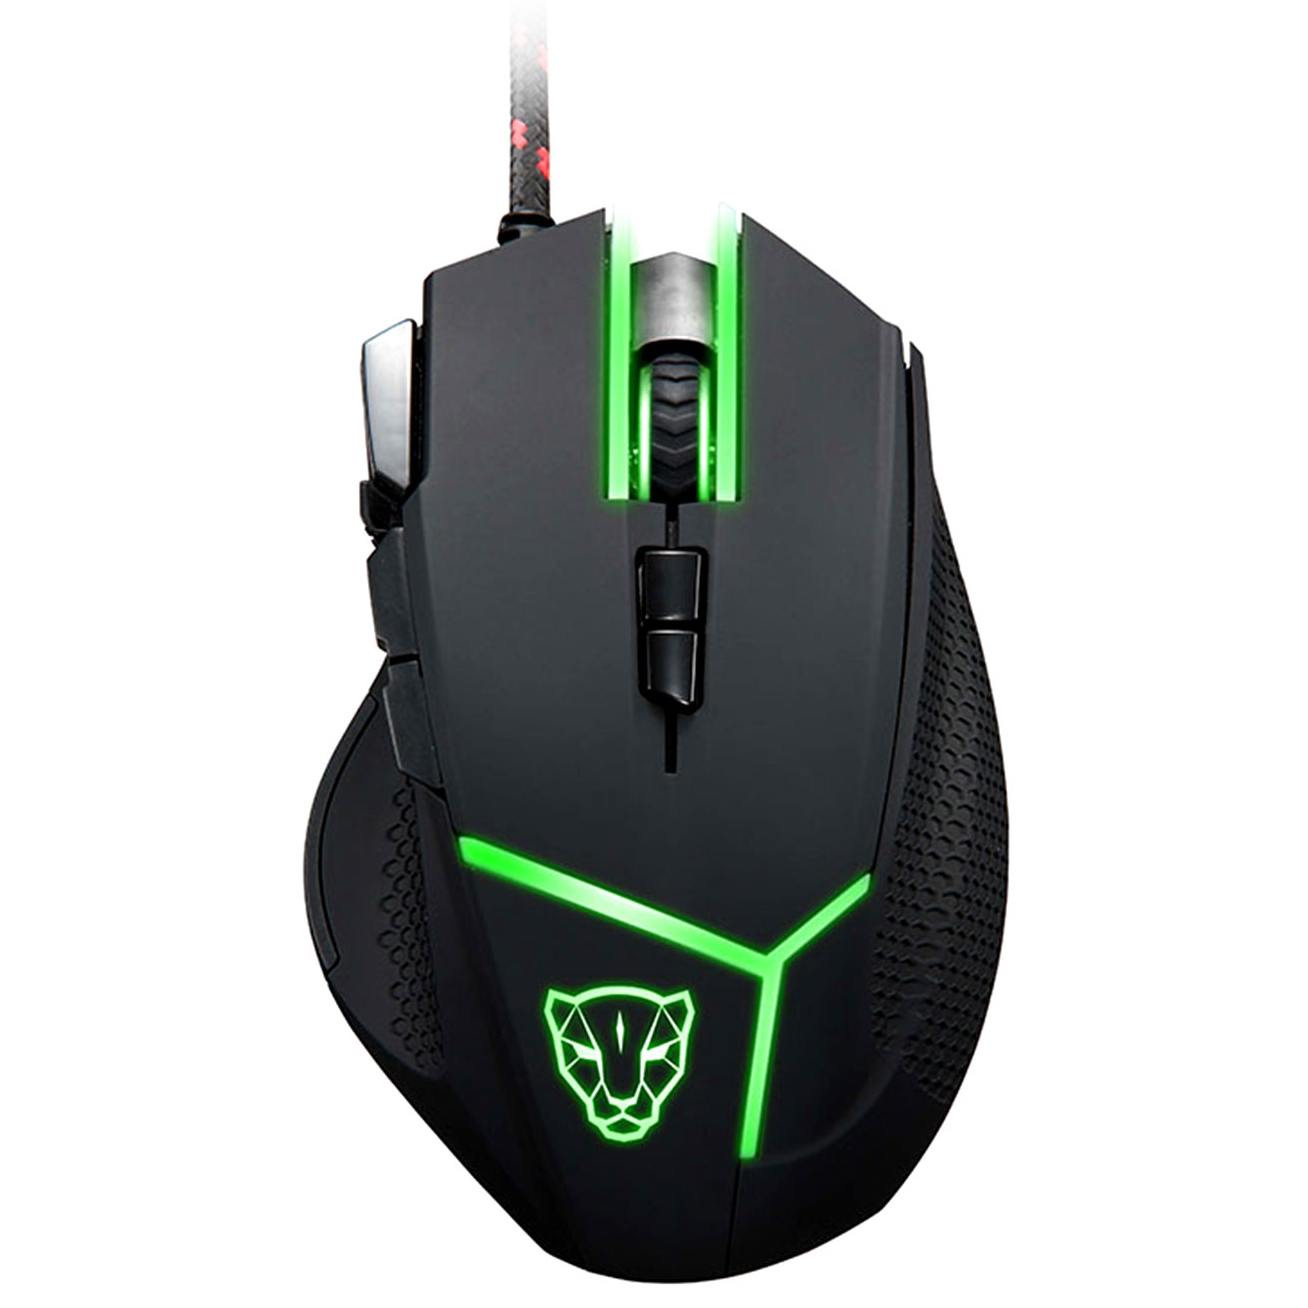 Motospeed V18 Gaming Wired Mouse